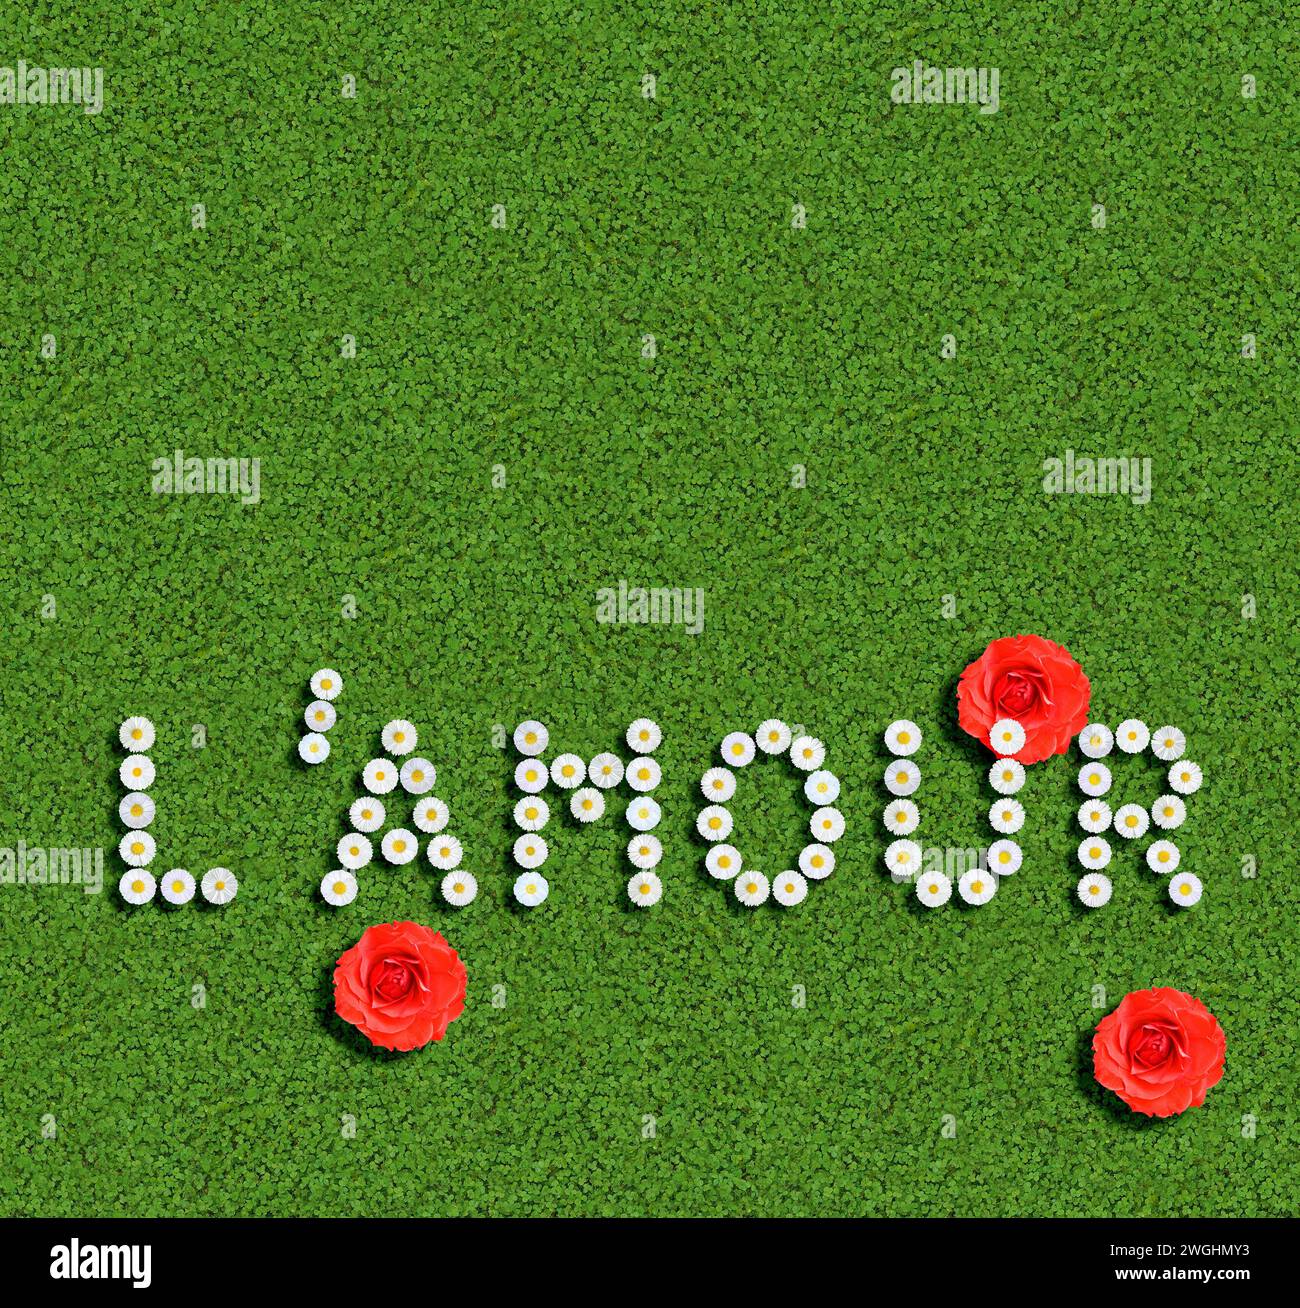 the French word amour, love, written with daisies (Bellis Perennis) Stock Photo